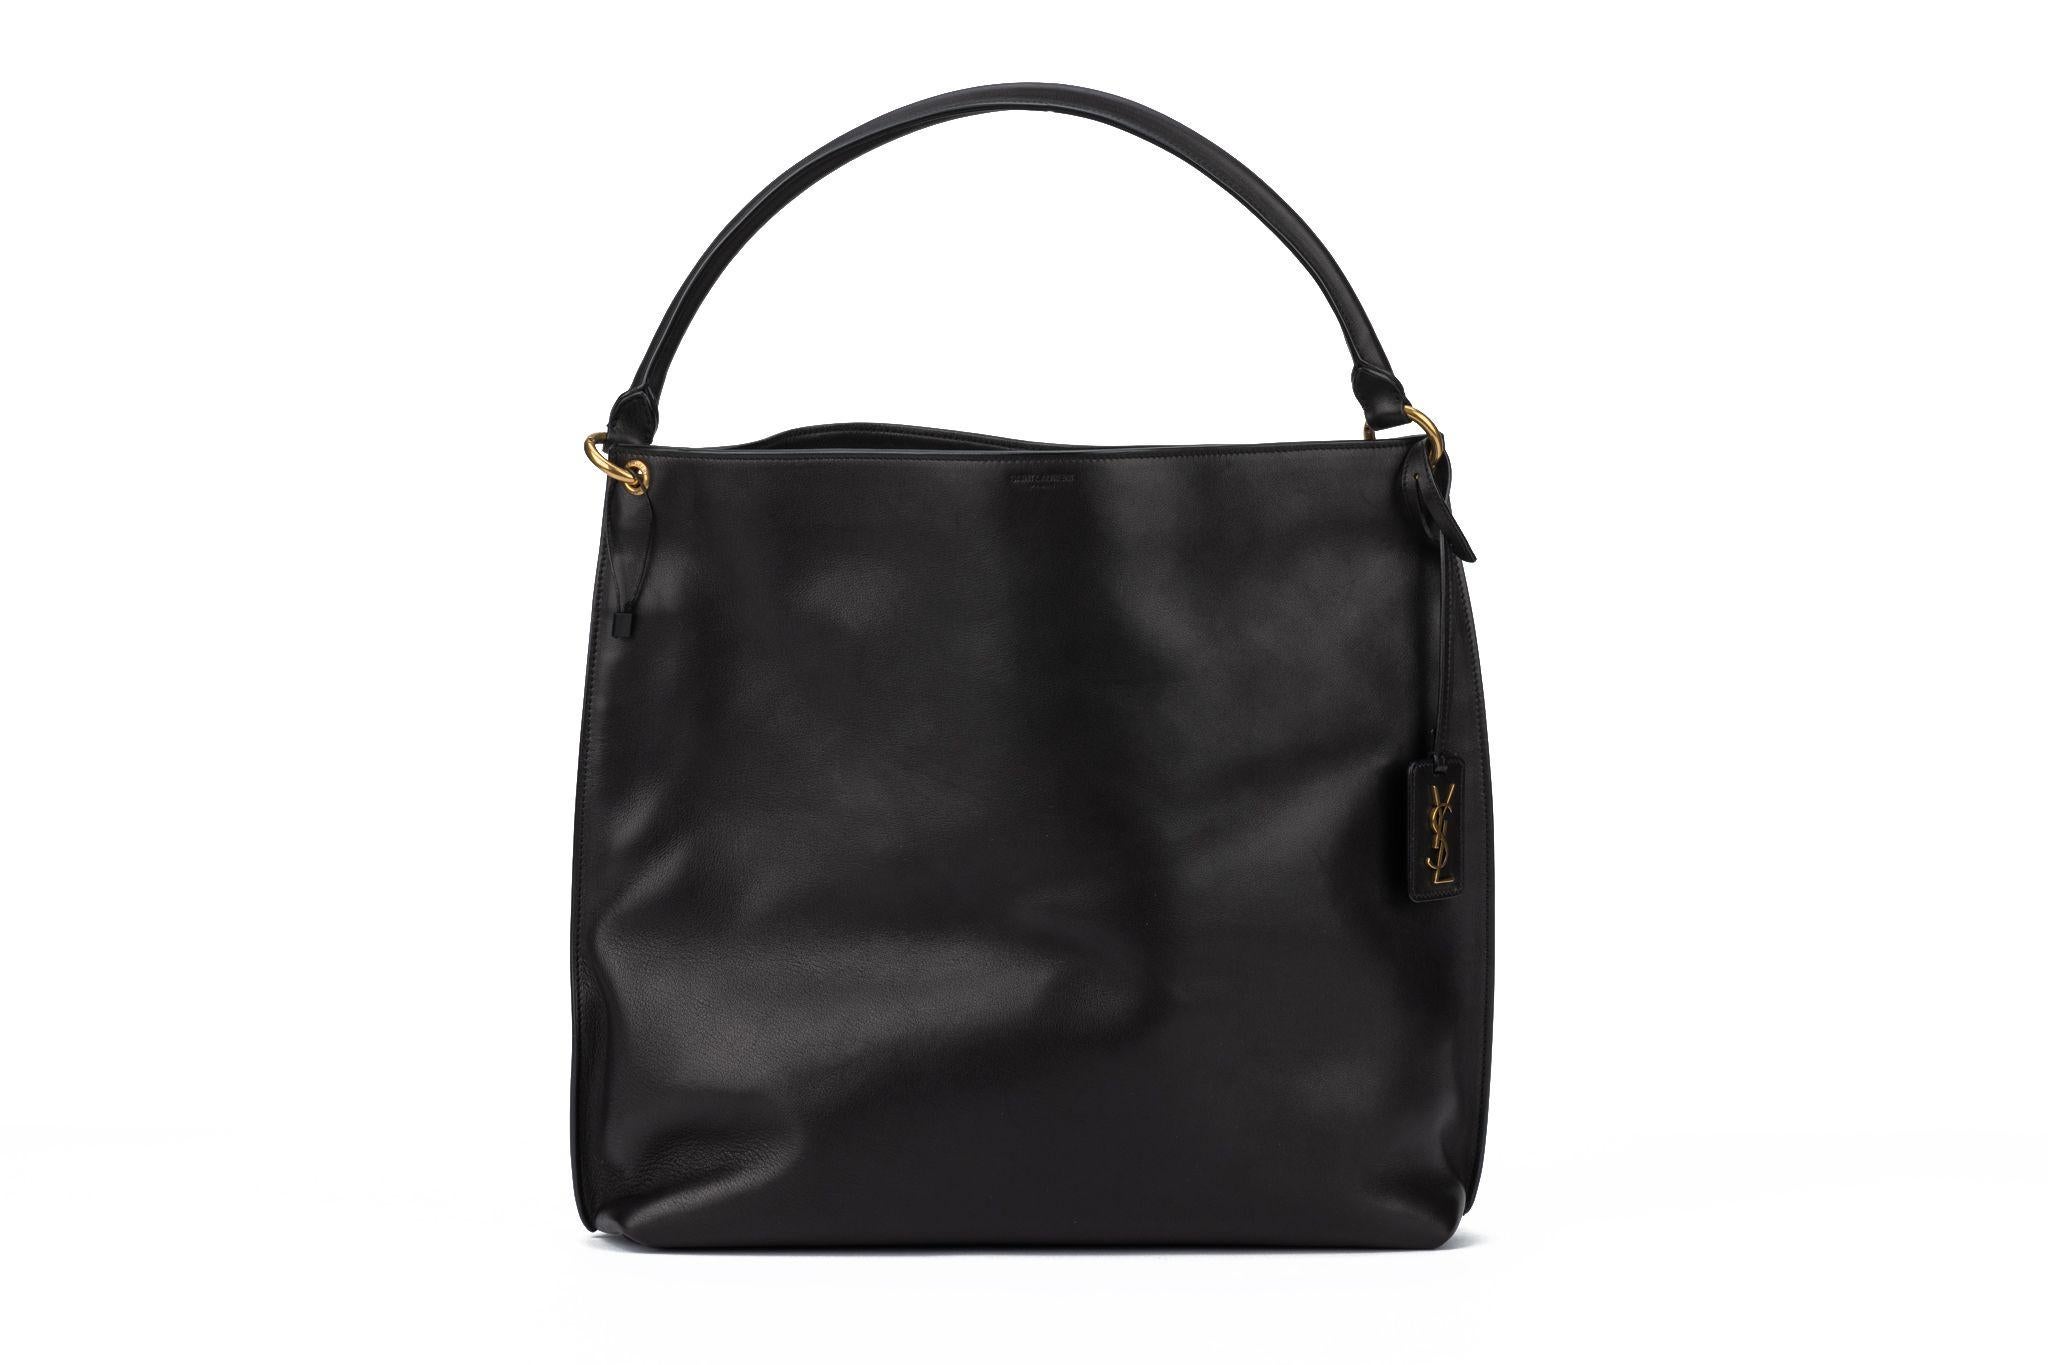 YSL New Black Tag Hobo Leather Bag In New Condition For Sale In West Hollywood, CA